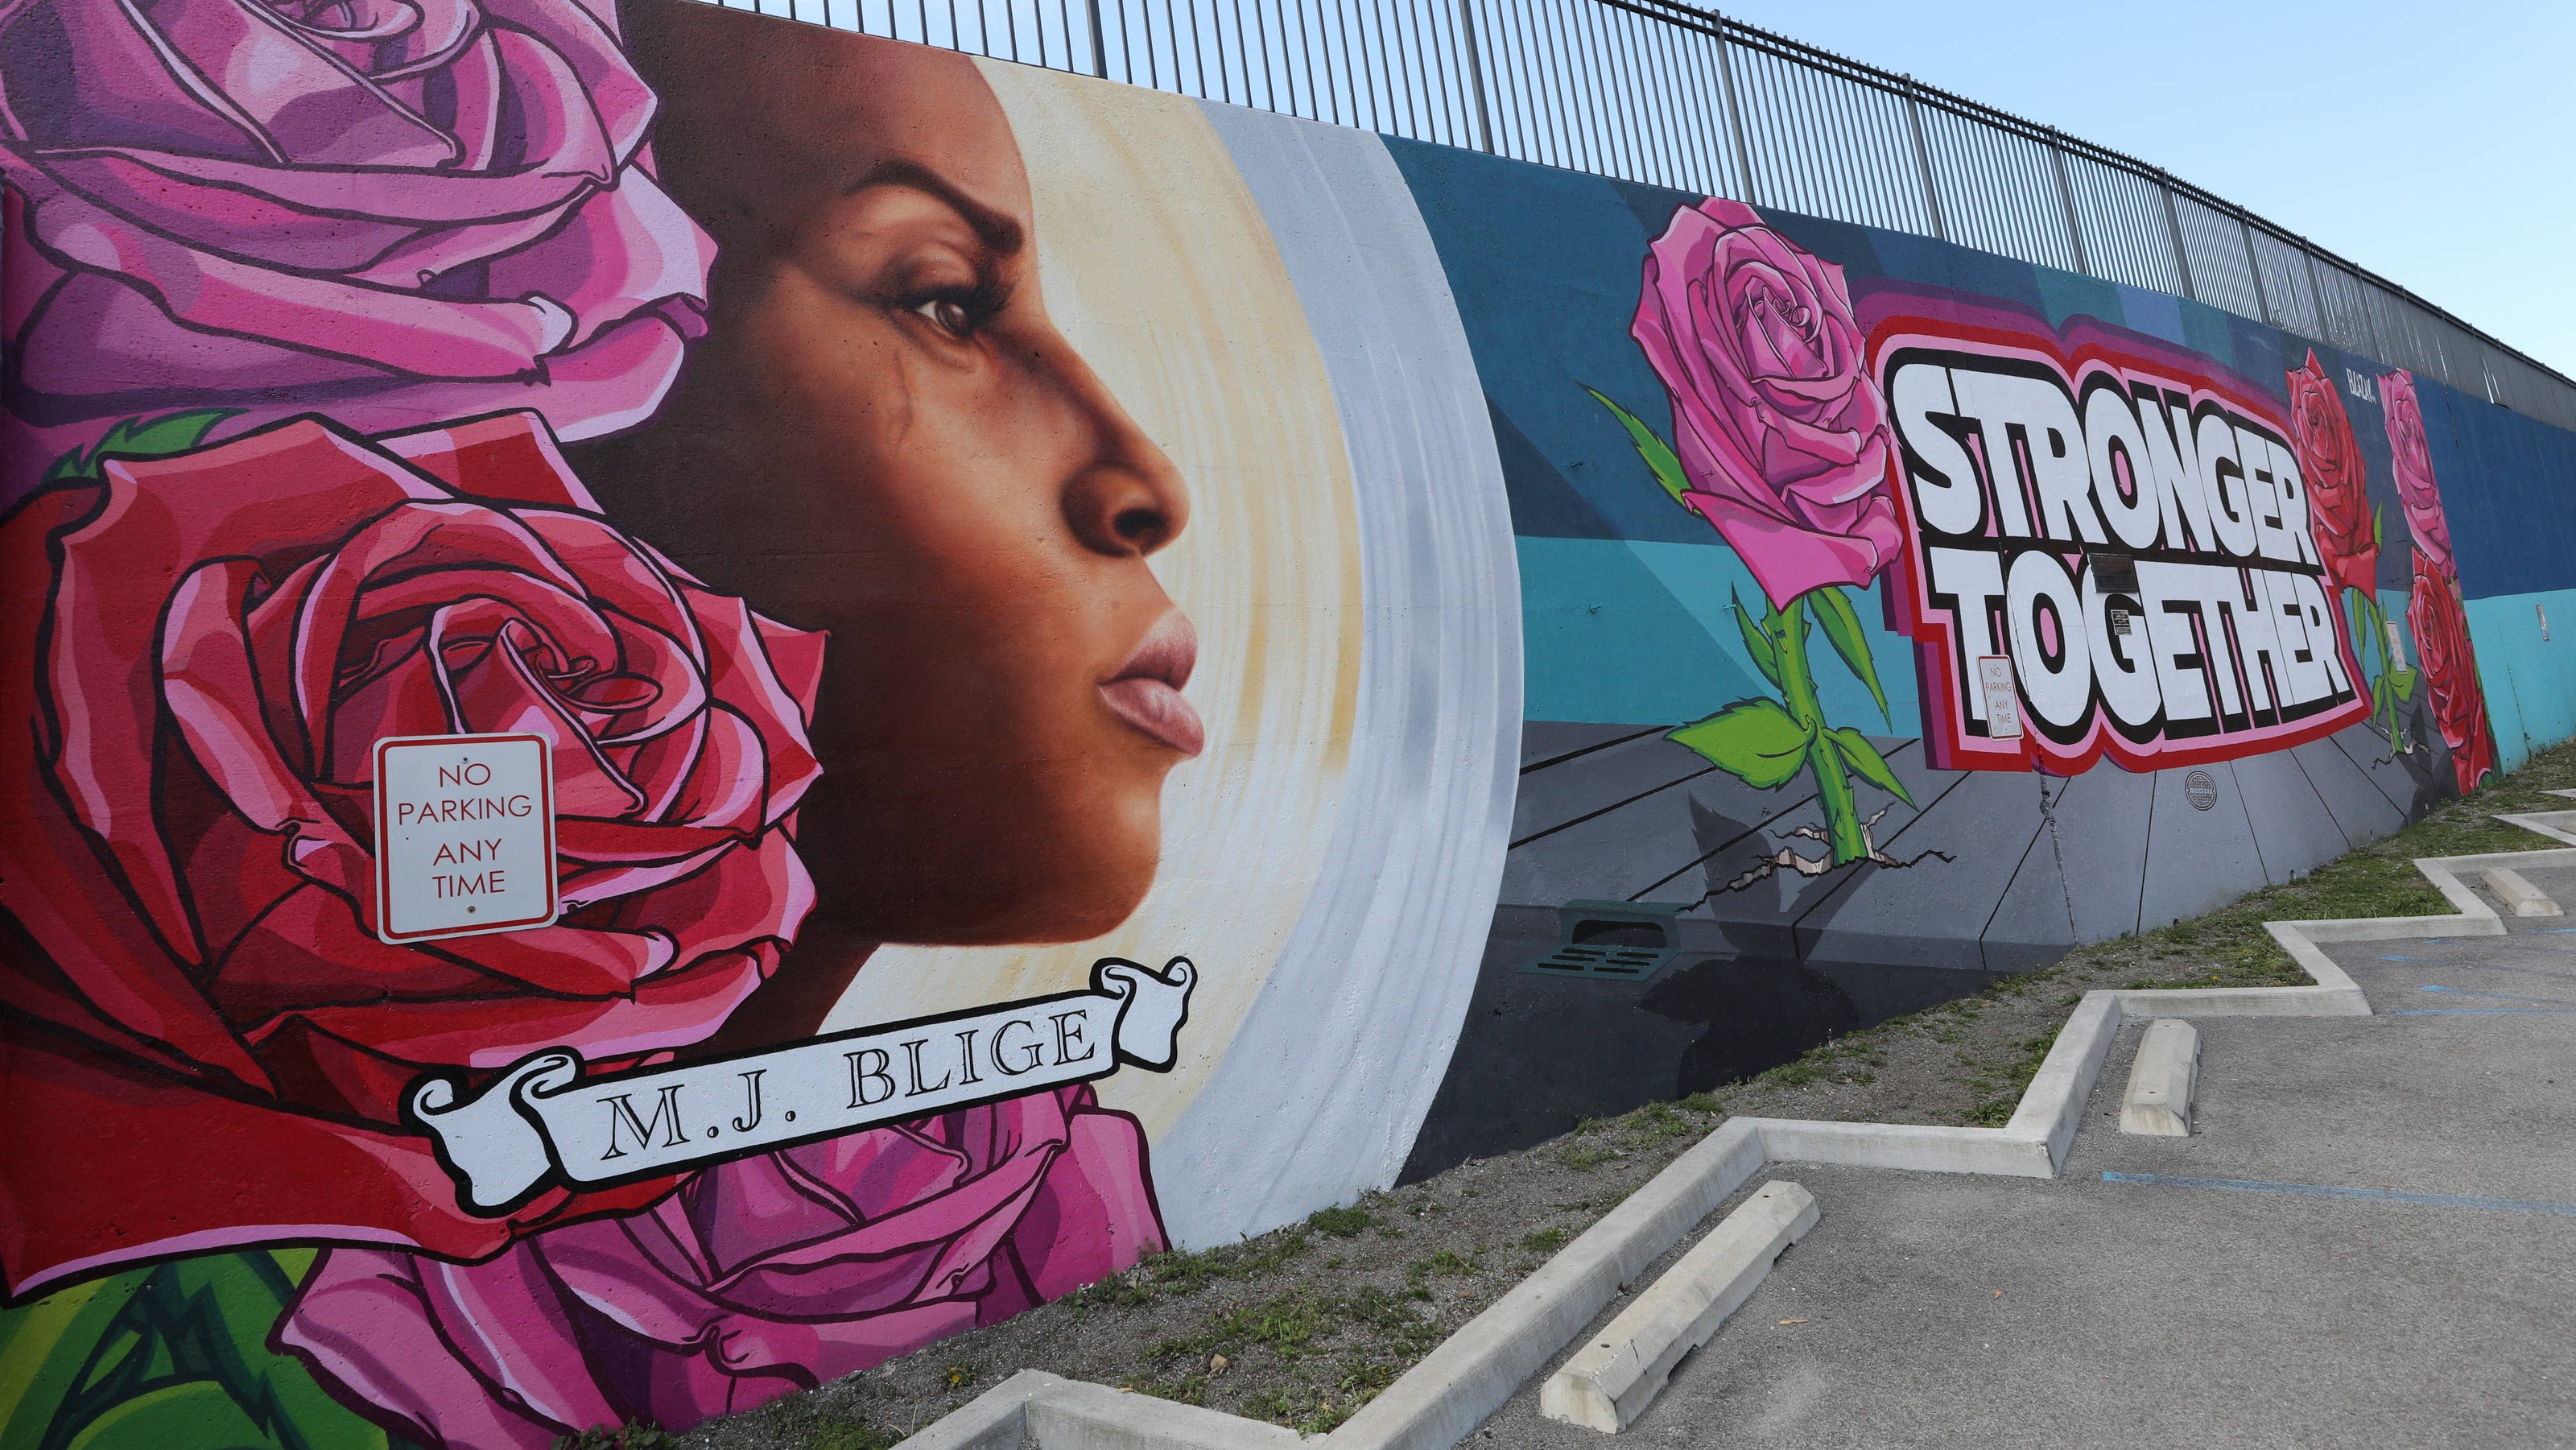 Mary J. Blige from Yonkers, has a mural unveiled at public housing where she grew up